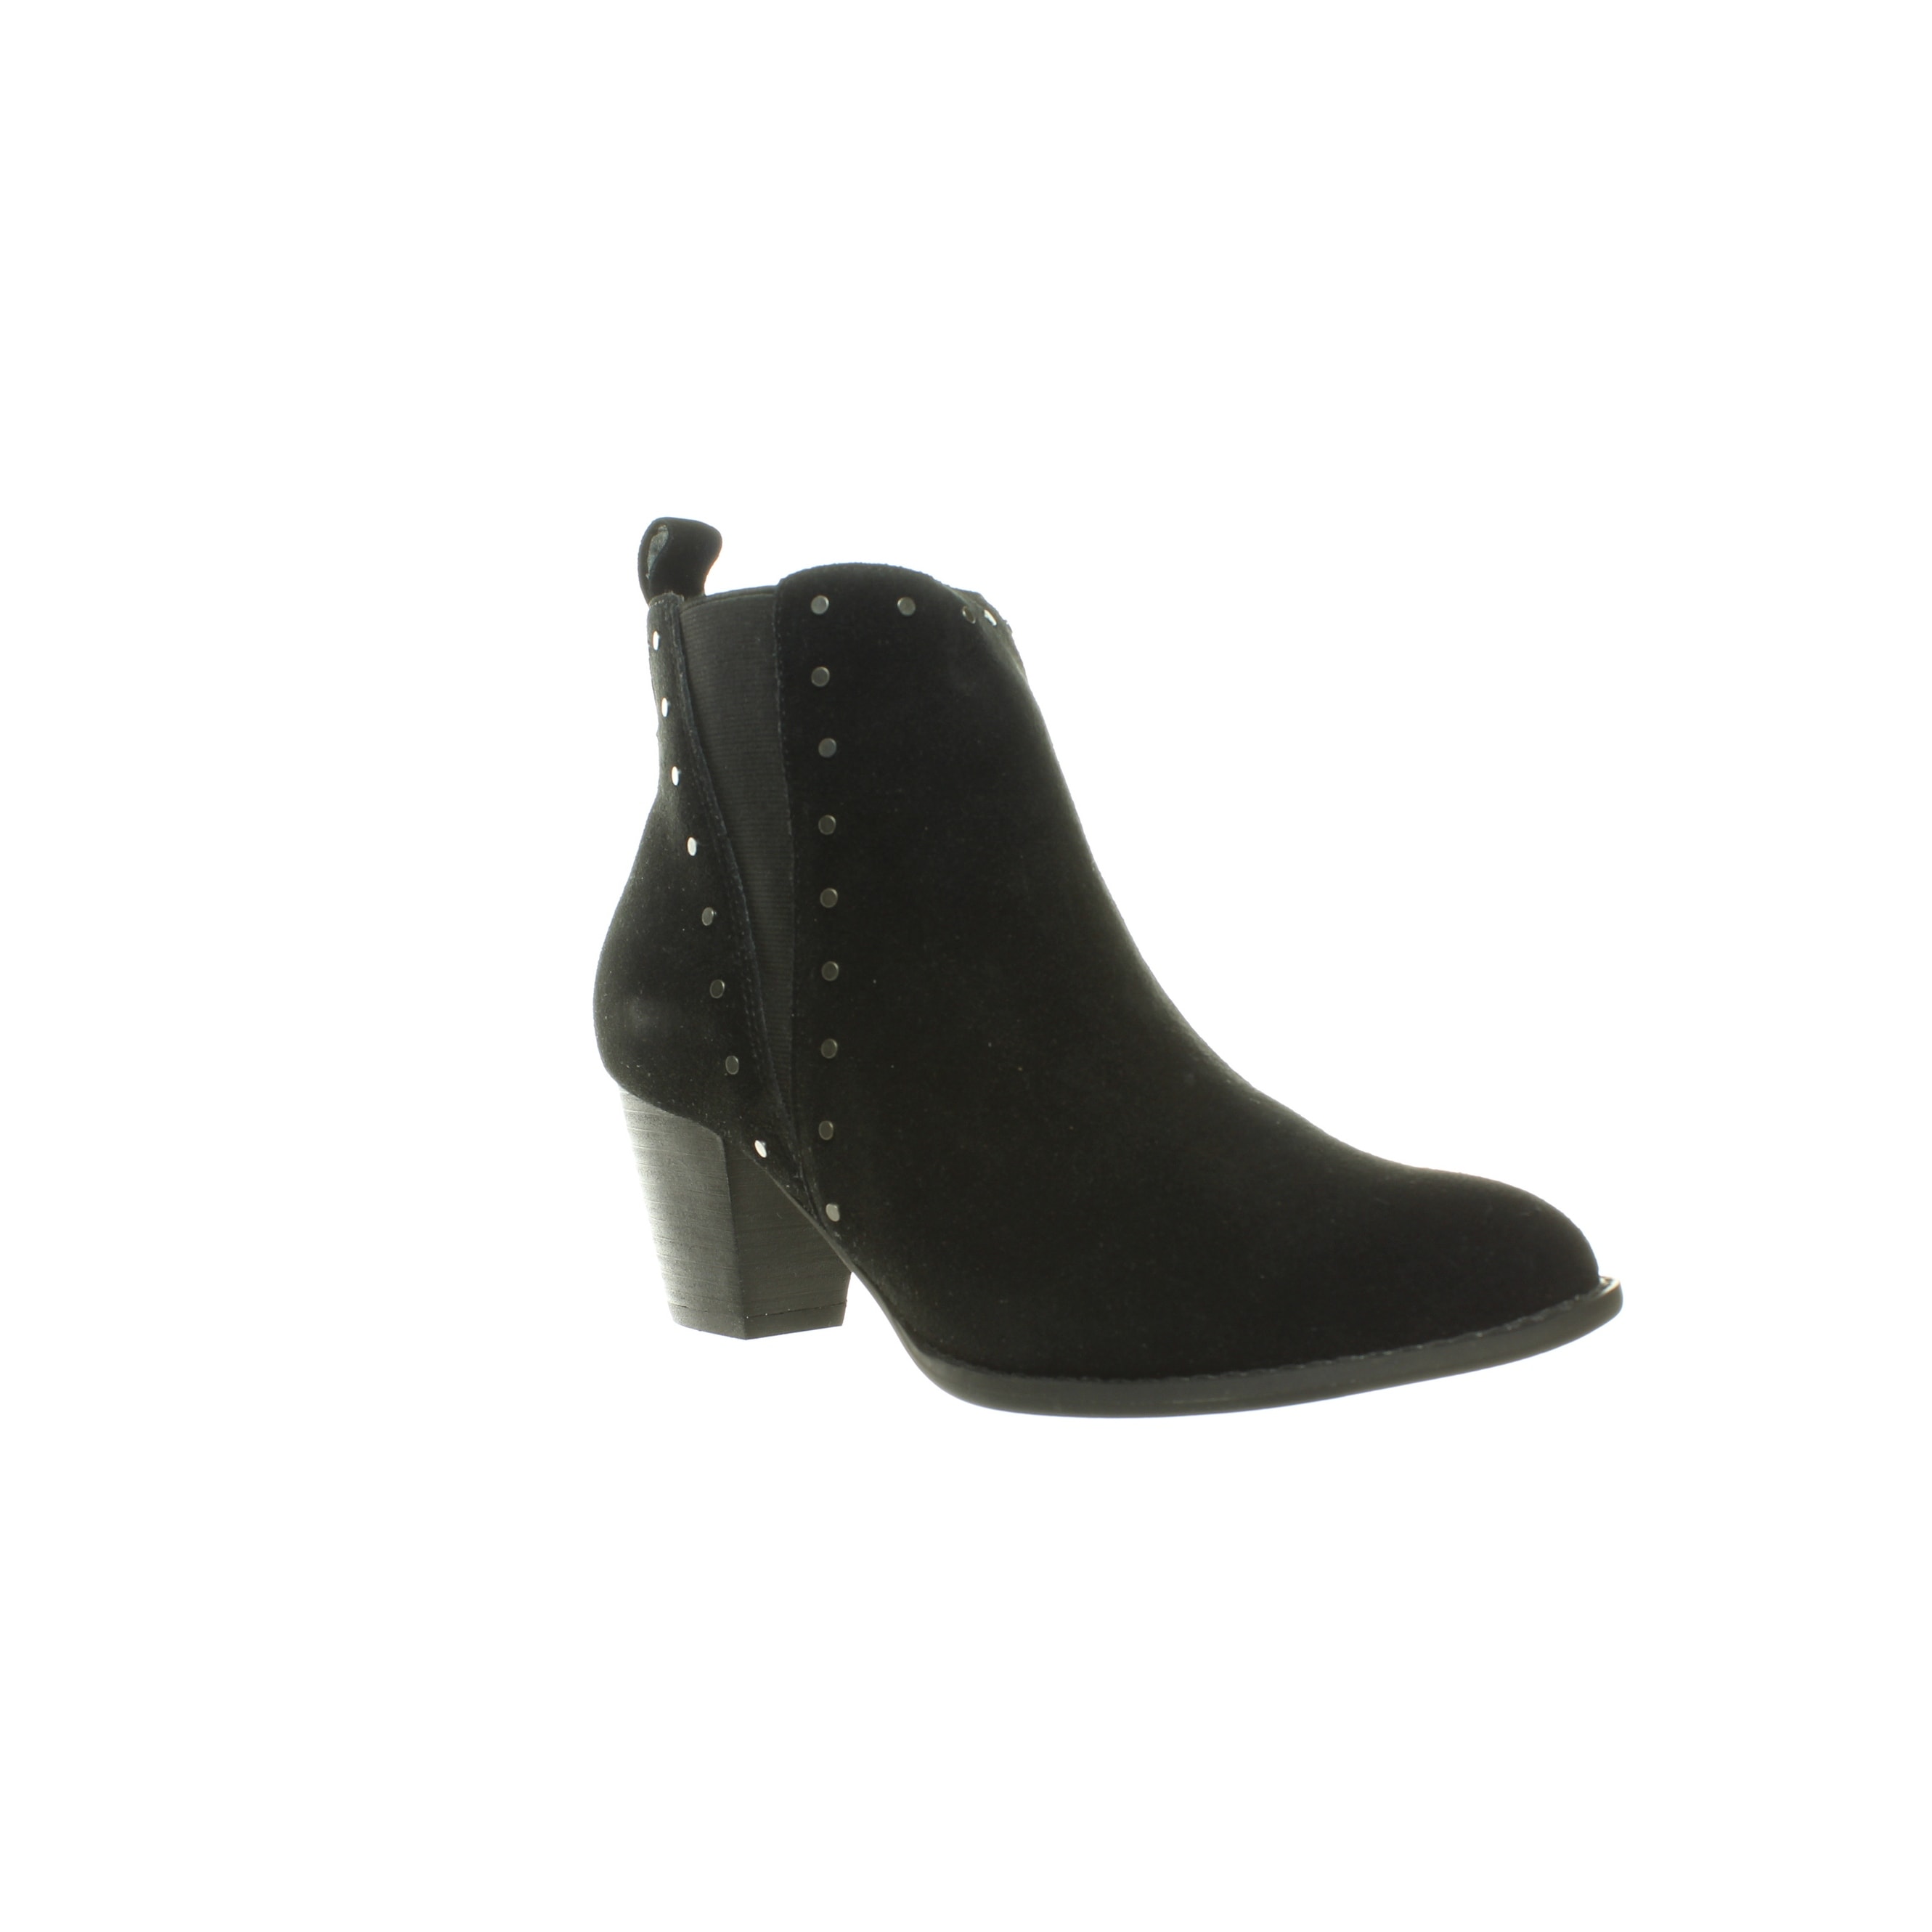 black ankle boots size 7